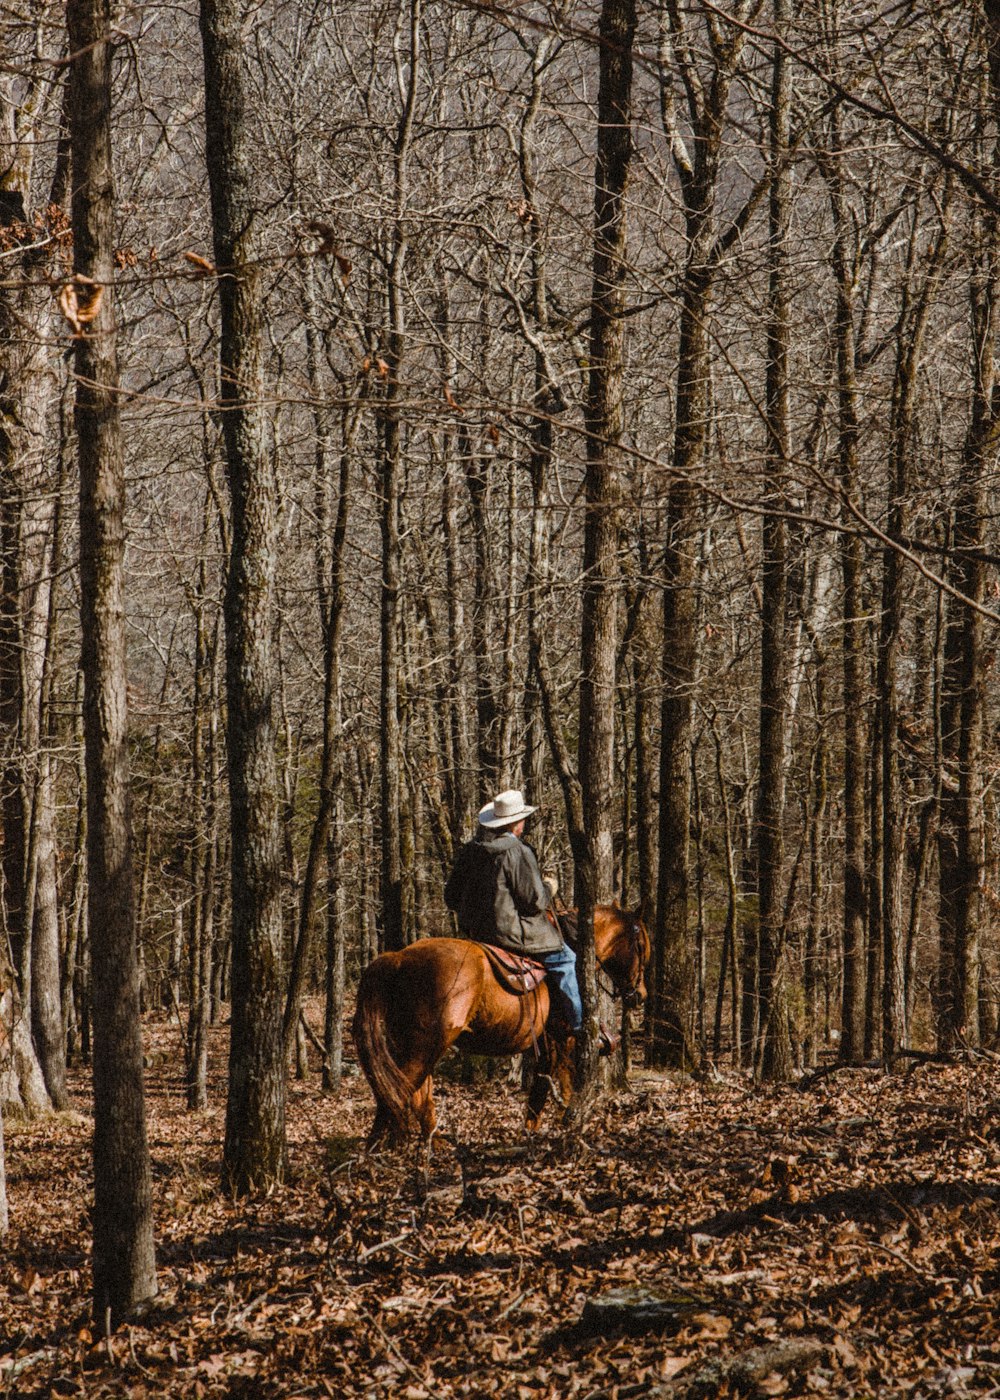 person riding horse in forest during daytime